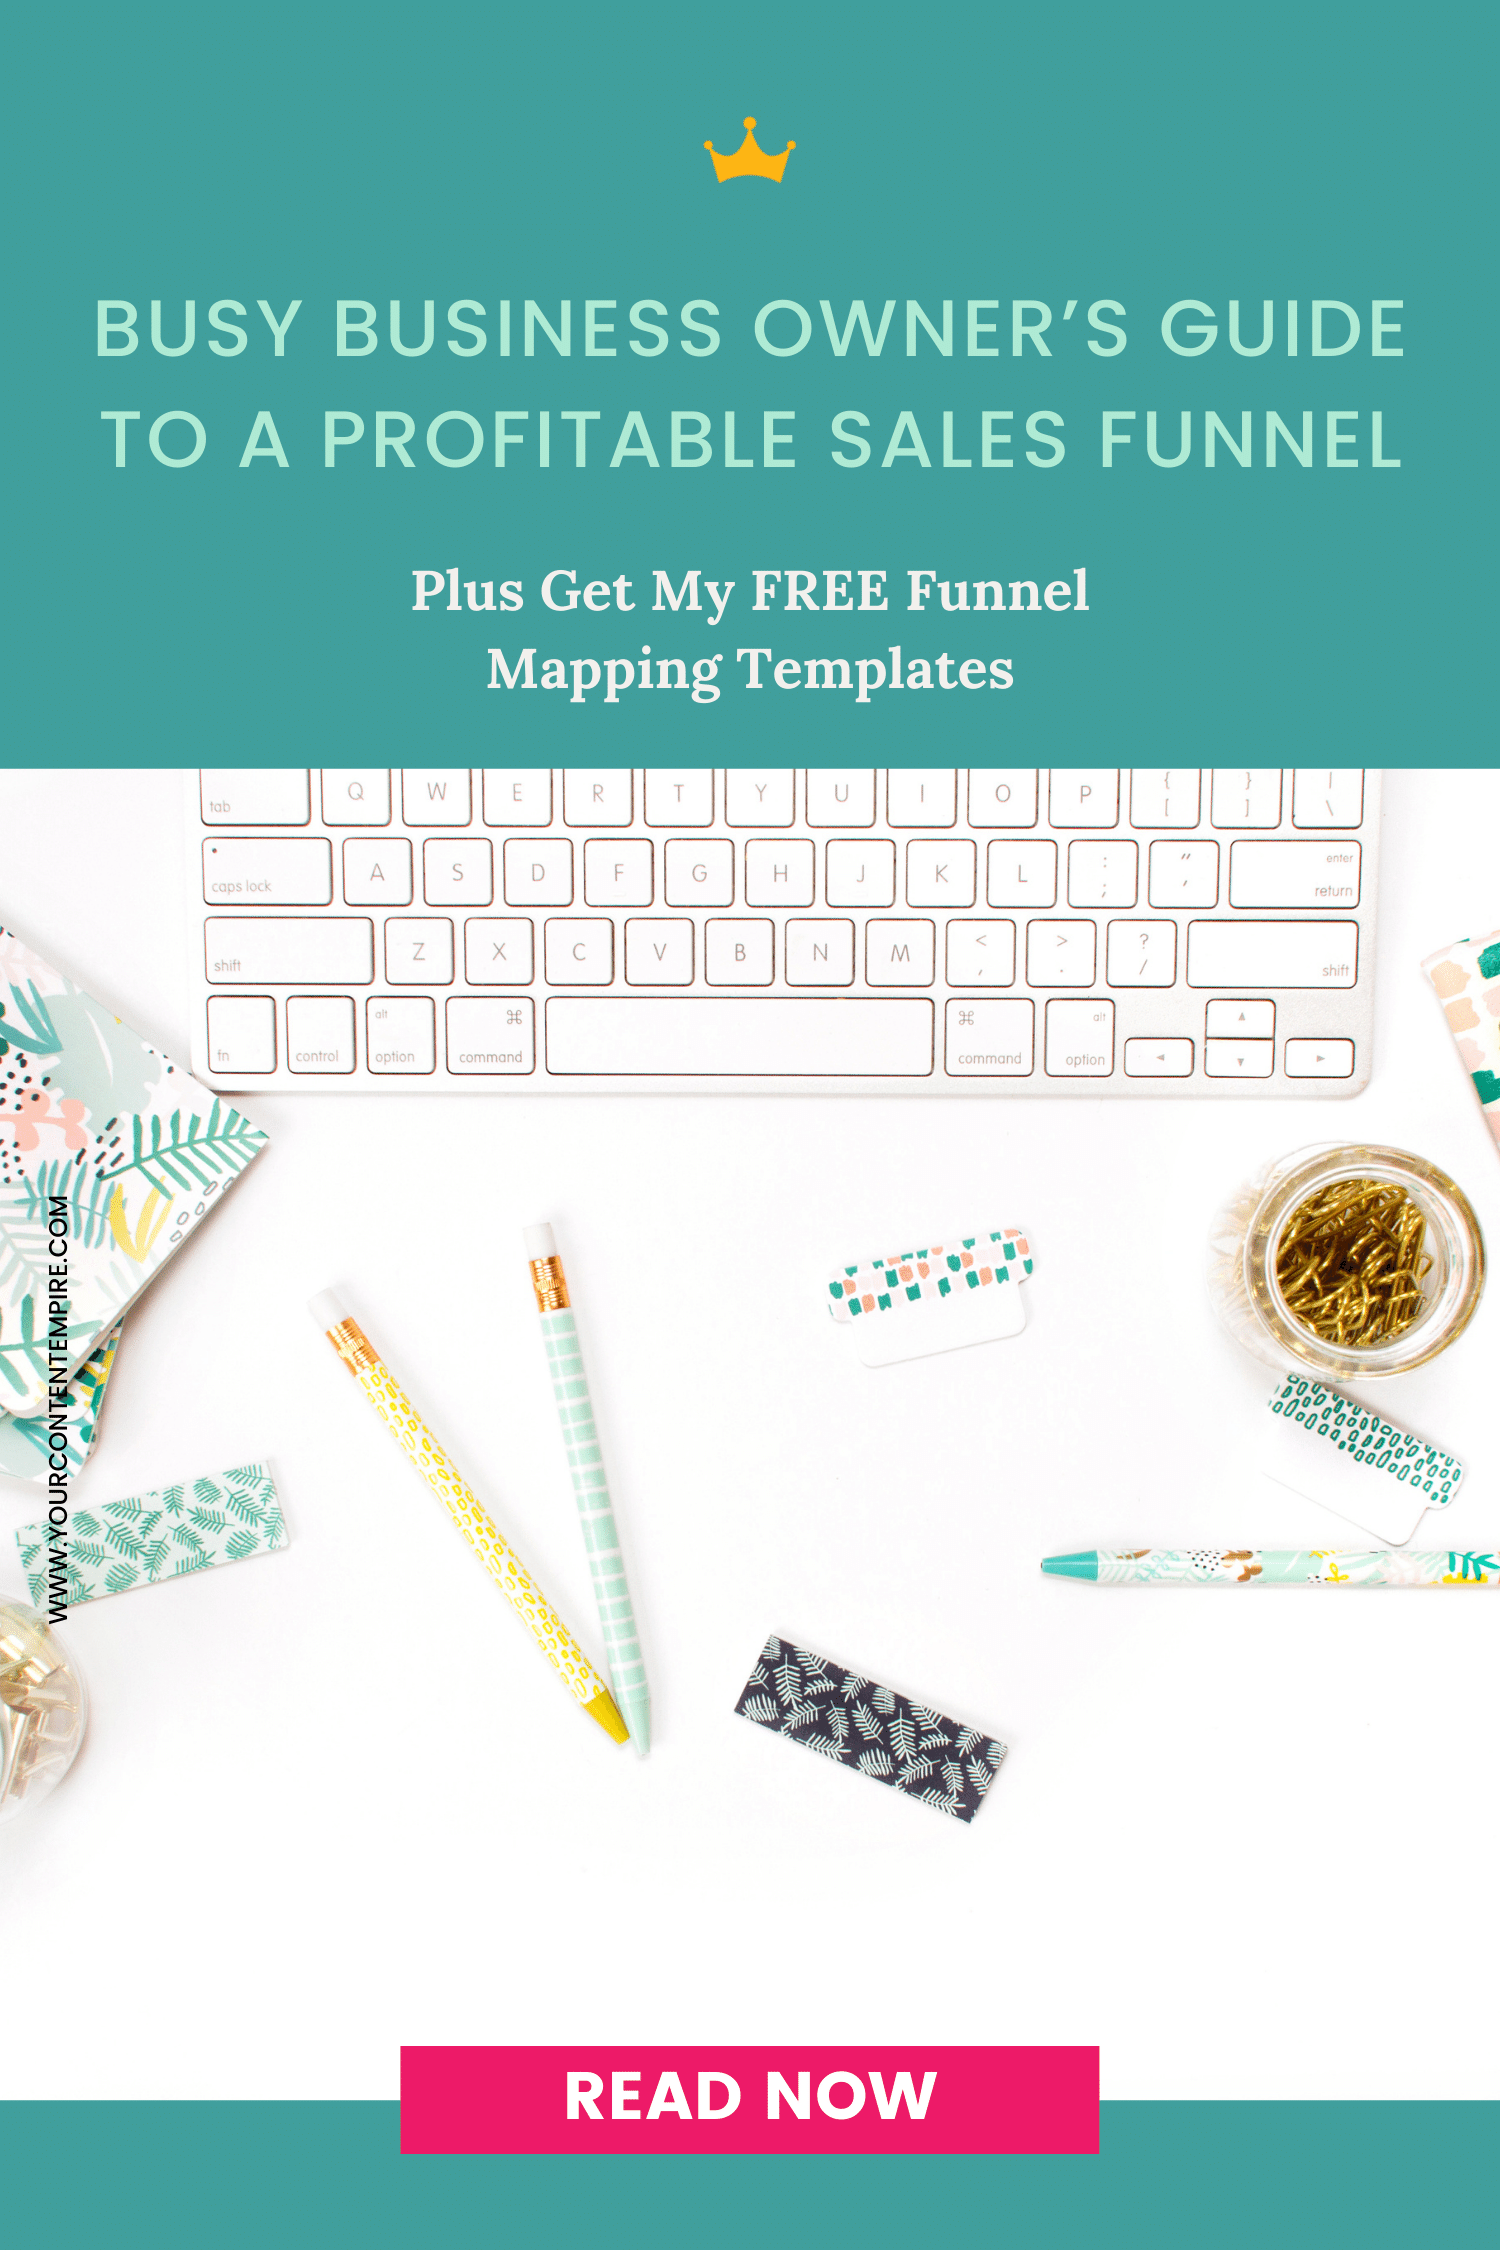 Busy Business Owner’s Guide to a Profitable Sales Funnel by Your Content Empire